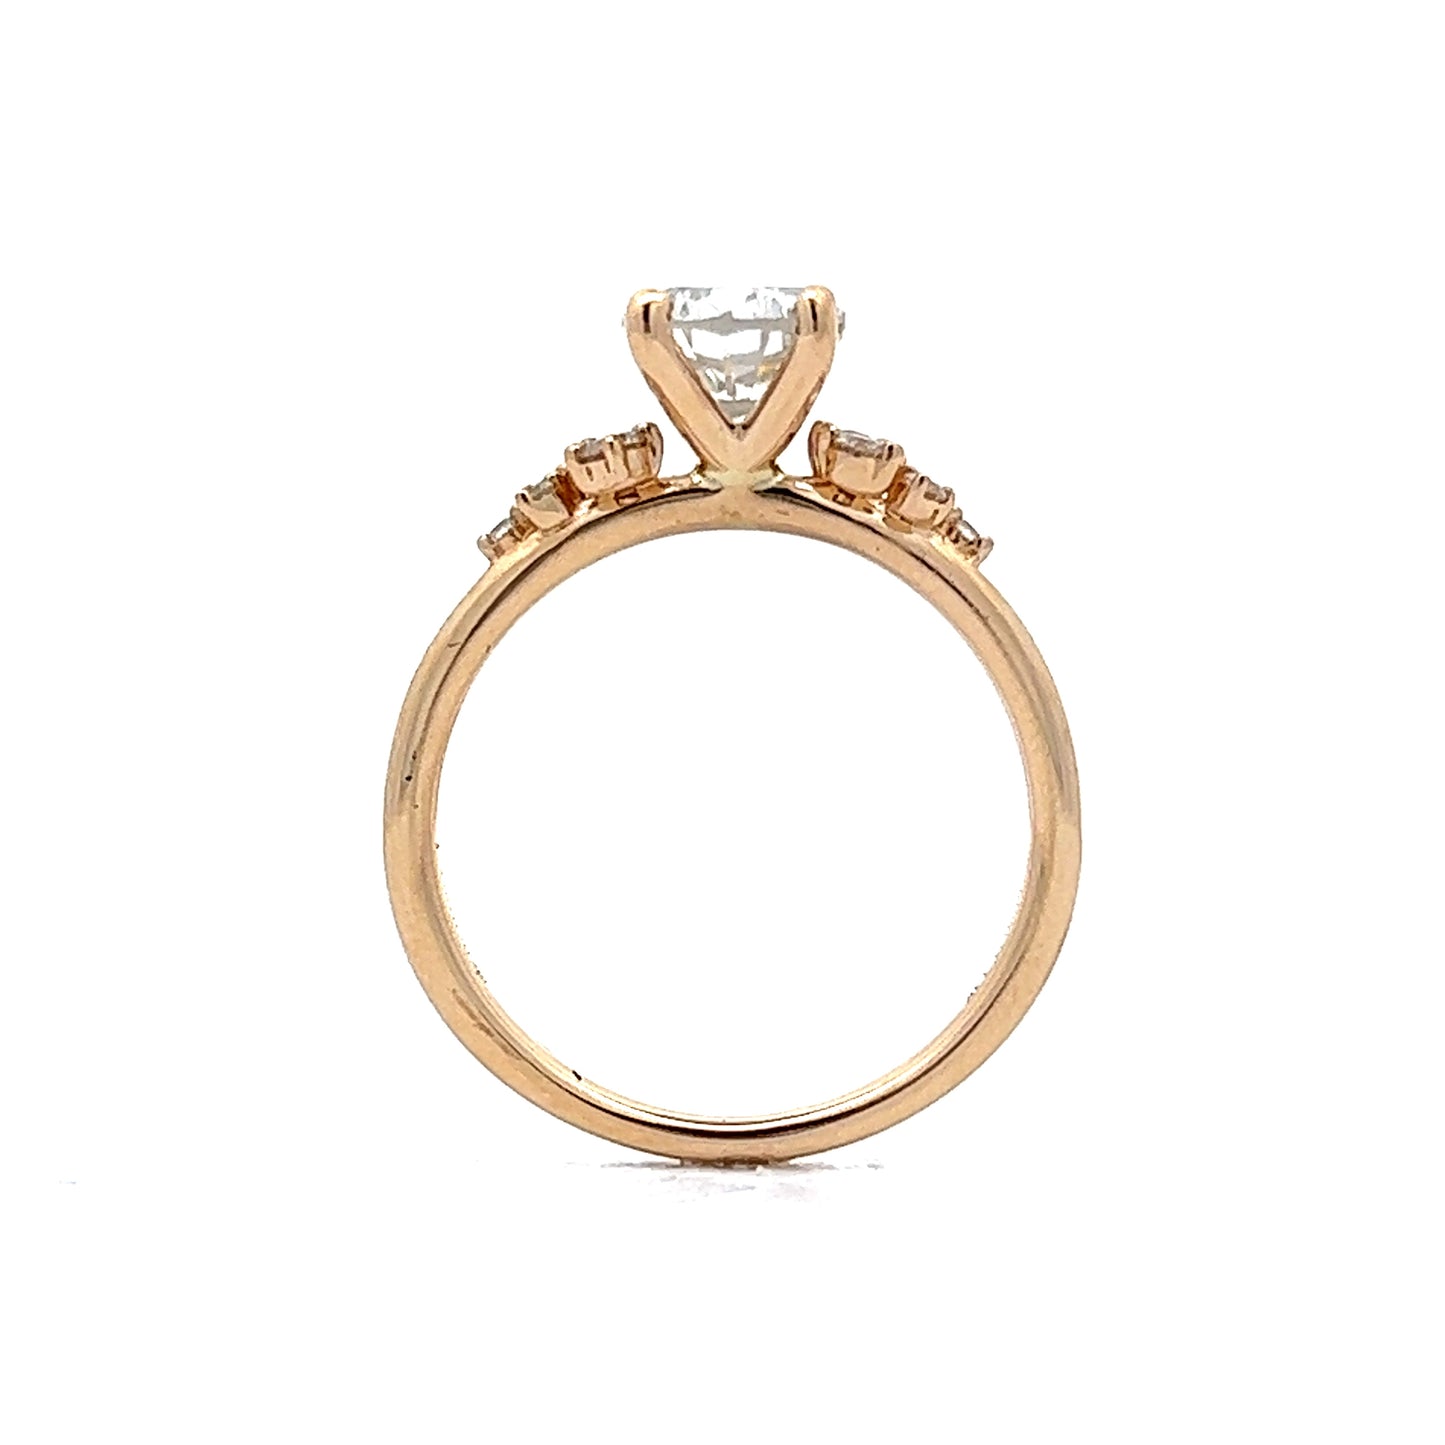 .87 Solitaire Diamond Engagement Ring in 14k Yellow Gold